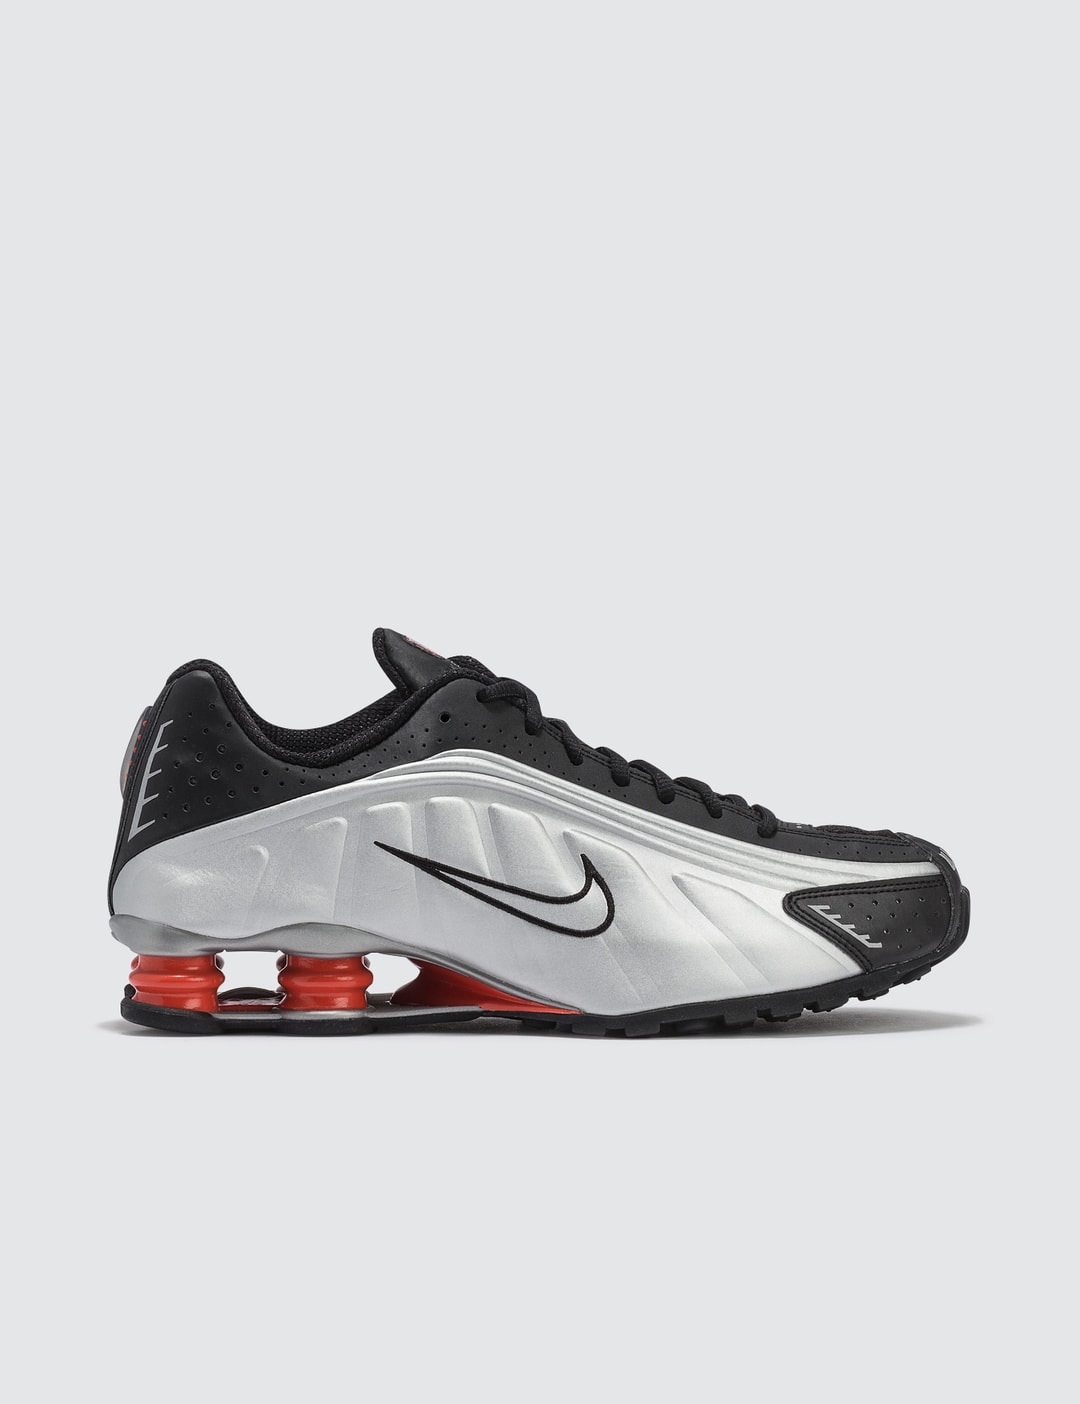 Nike - Nike Shox R4 | Globally Curated Fashion and Lifestyle by Hypebeast